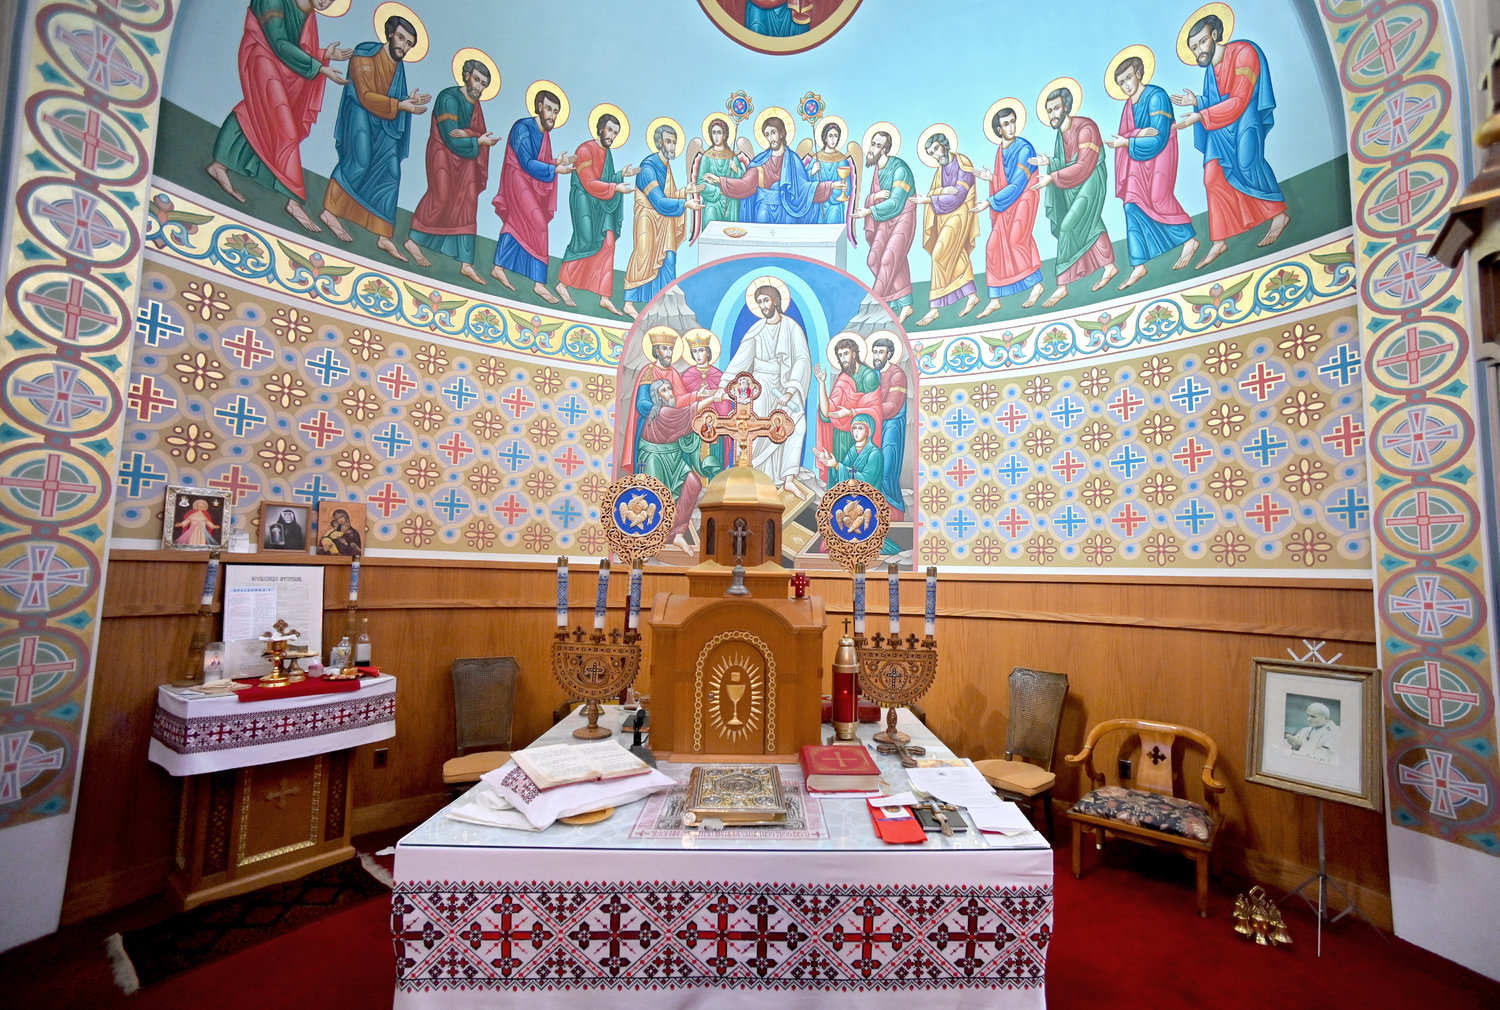 PAUSING TO REMEMBER — From the altar of the St. Volodymyr Ukrainian Catholic Church, shown here on Tuesday, Feb. 21, members of the local Ukrainian community and fellow members of the community will pause today, at 5 p.m., for a somber commemoration to mark the one-year anniversary of the Russian invasion of Ukraine. Following the service, people are invited to gather in the auditorium for refreshments.